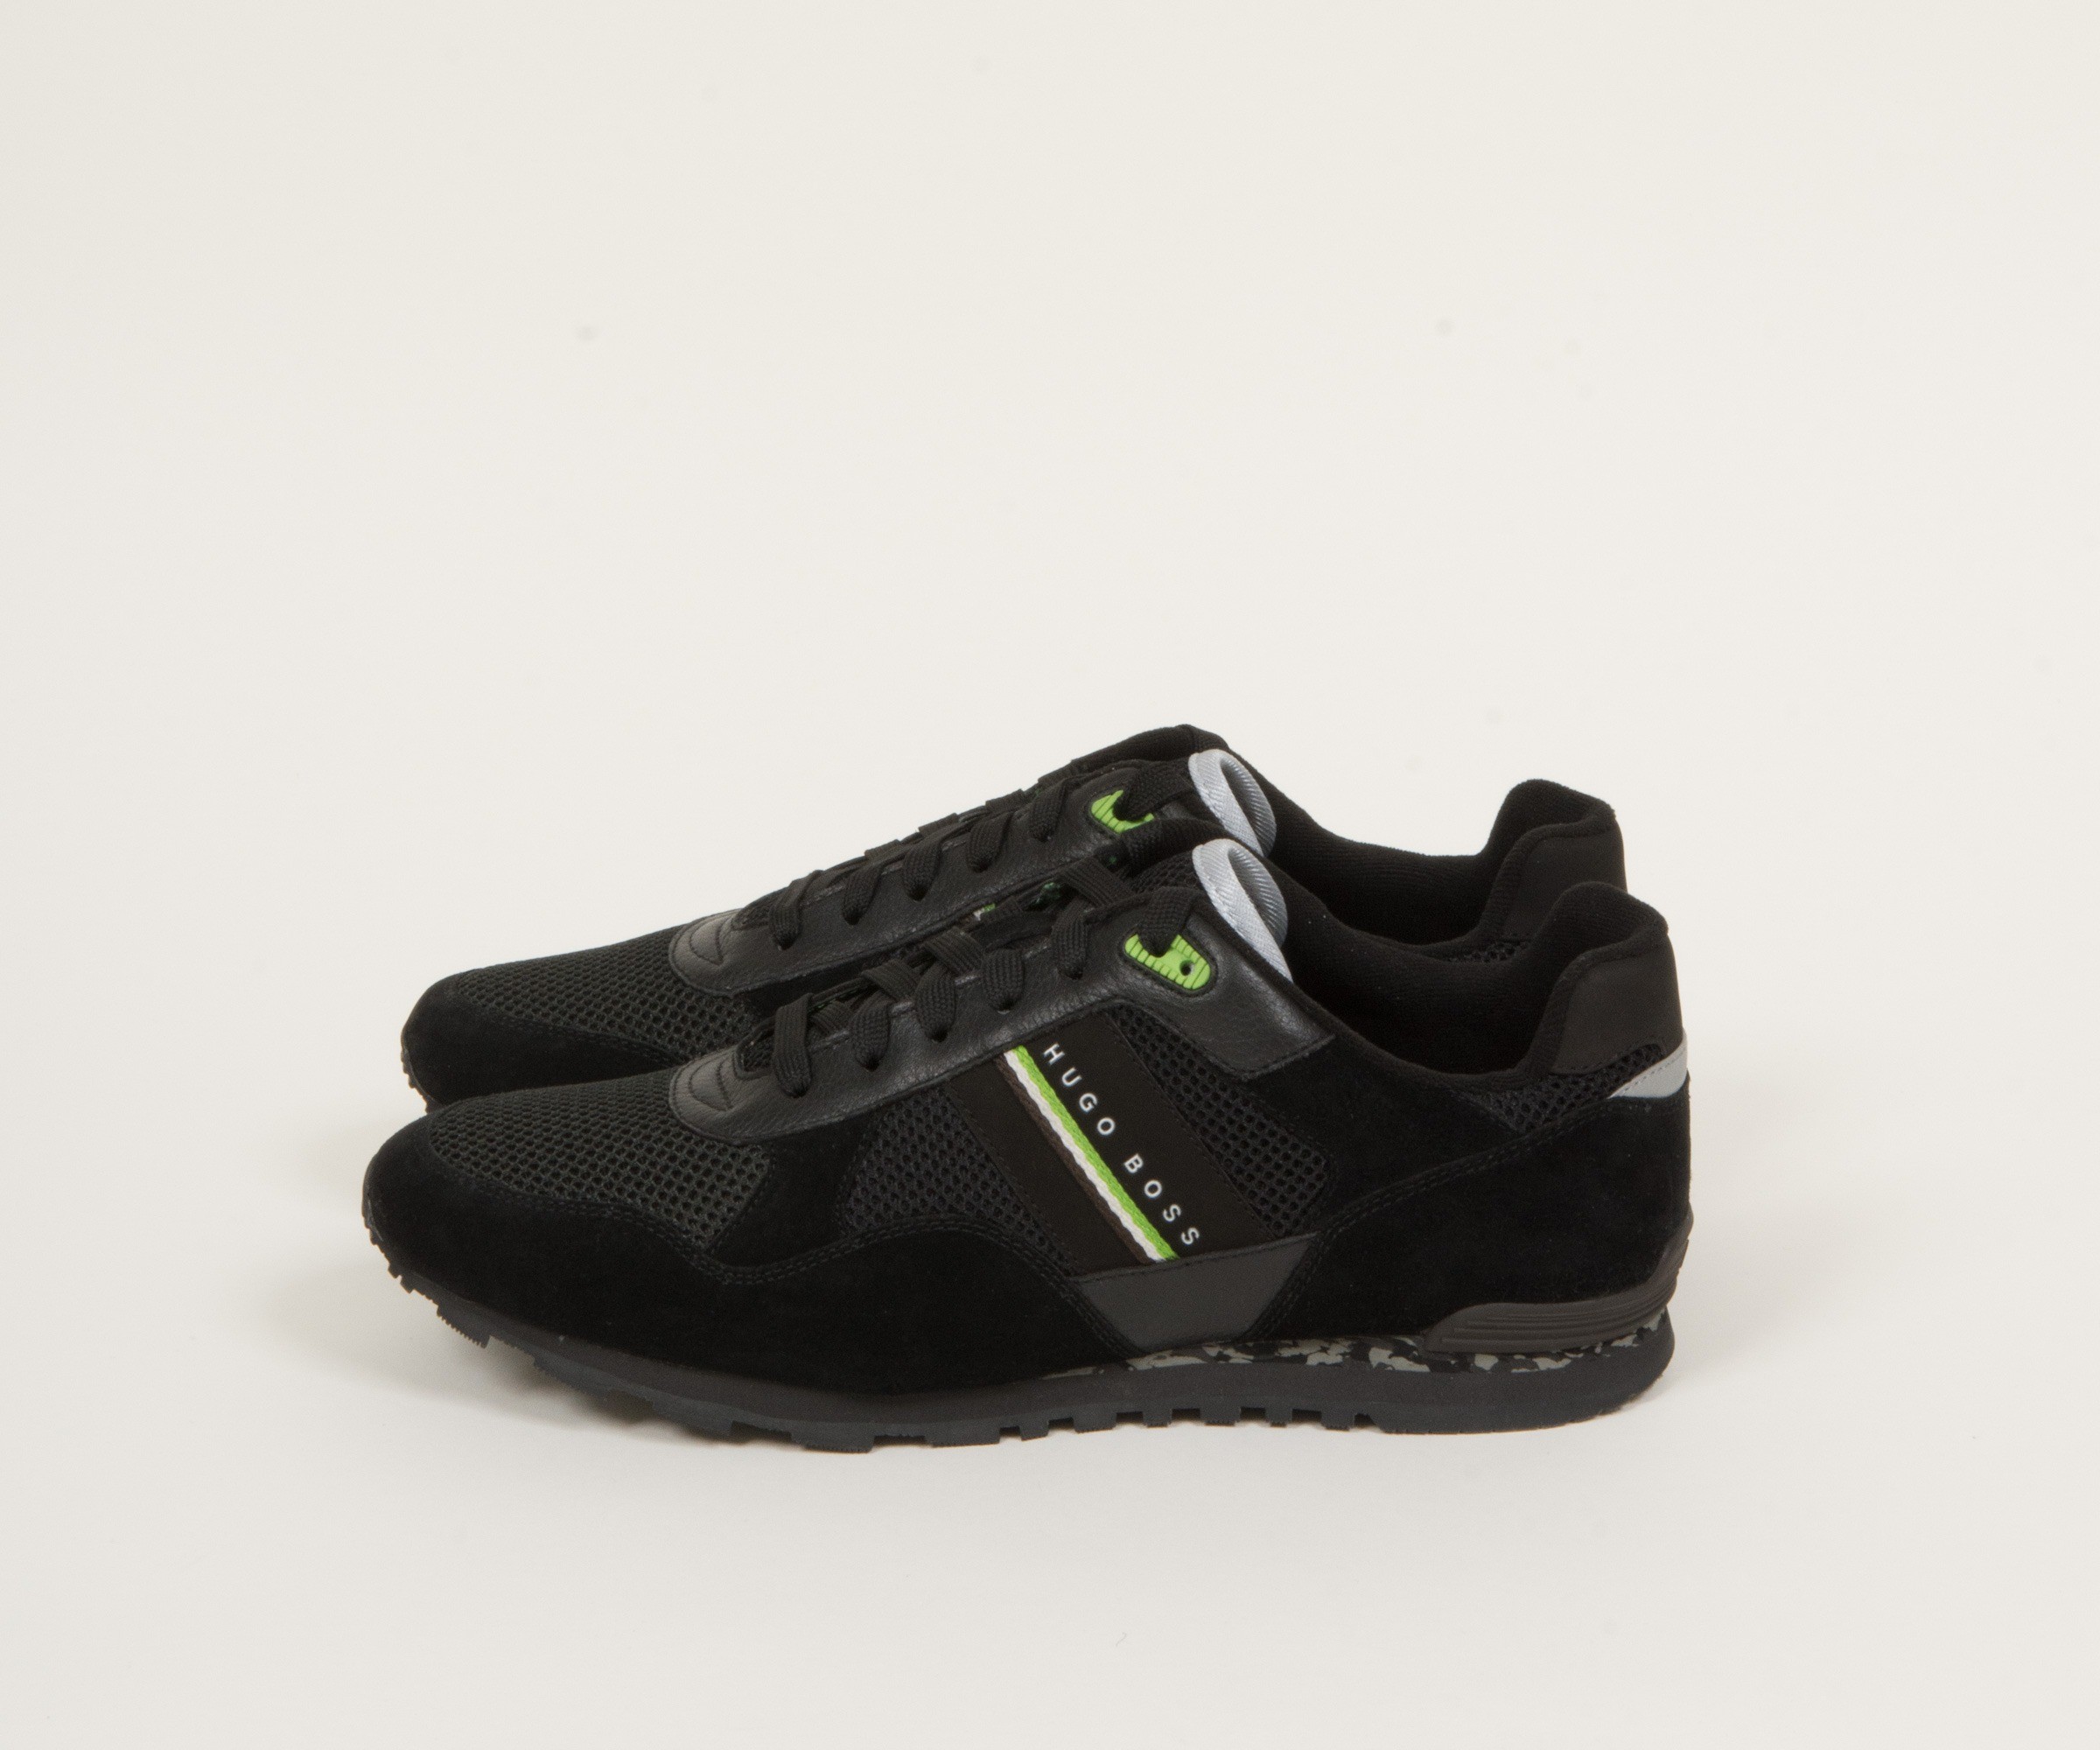 Hugo Boss Green Runcool Camo Trainer With Suede and Mesh Detail Black